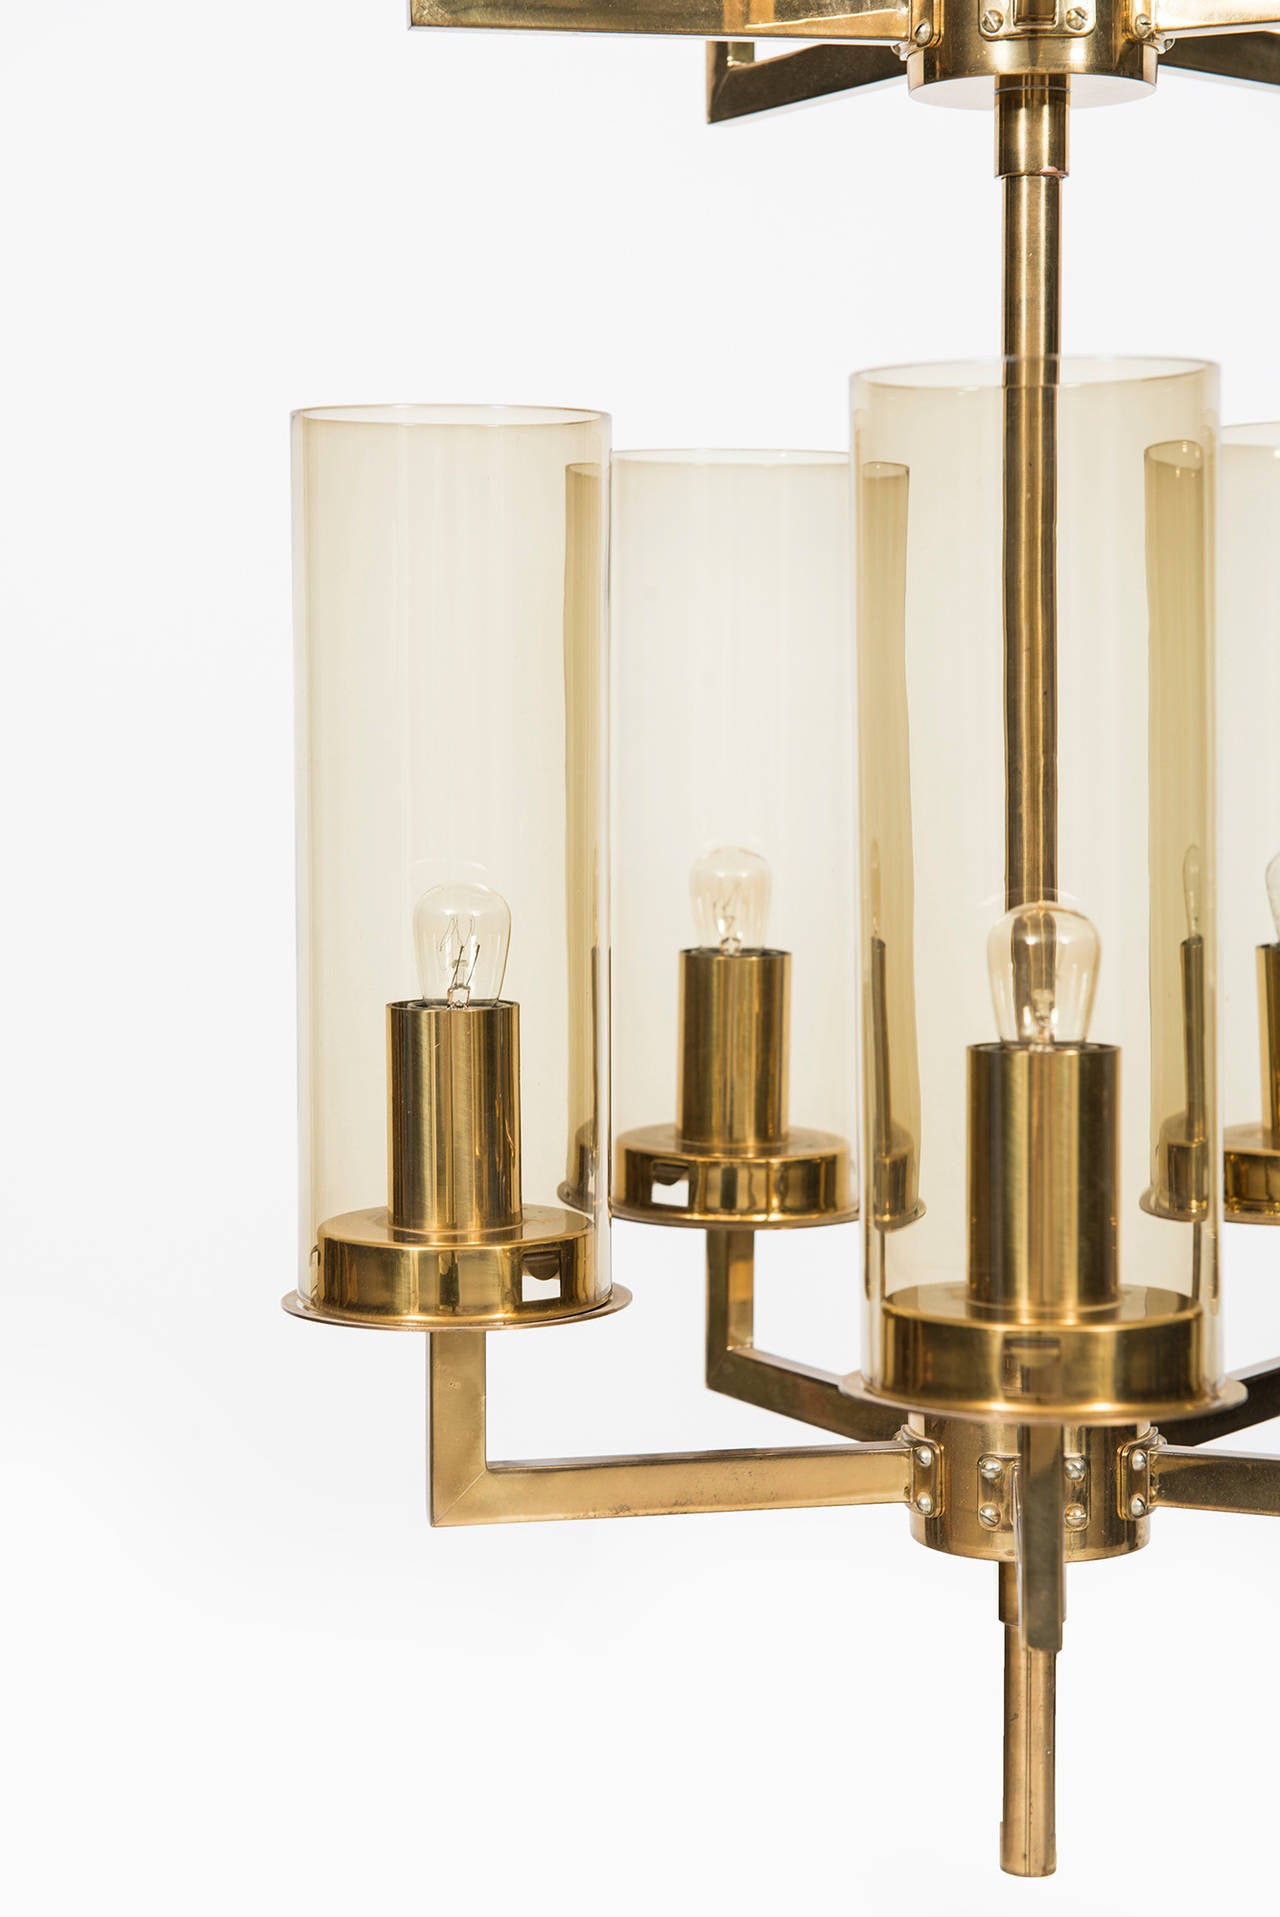 Big ceiling lamp in brass and glass designed by Hans-Agne Jakobsson. Produced by Hans-Agne Jakobsson in Markaryd, Sweden.